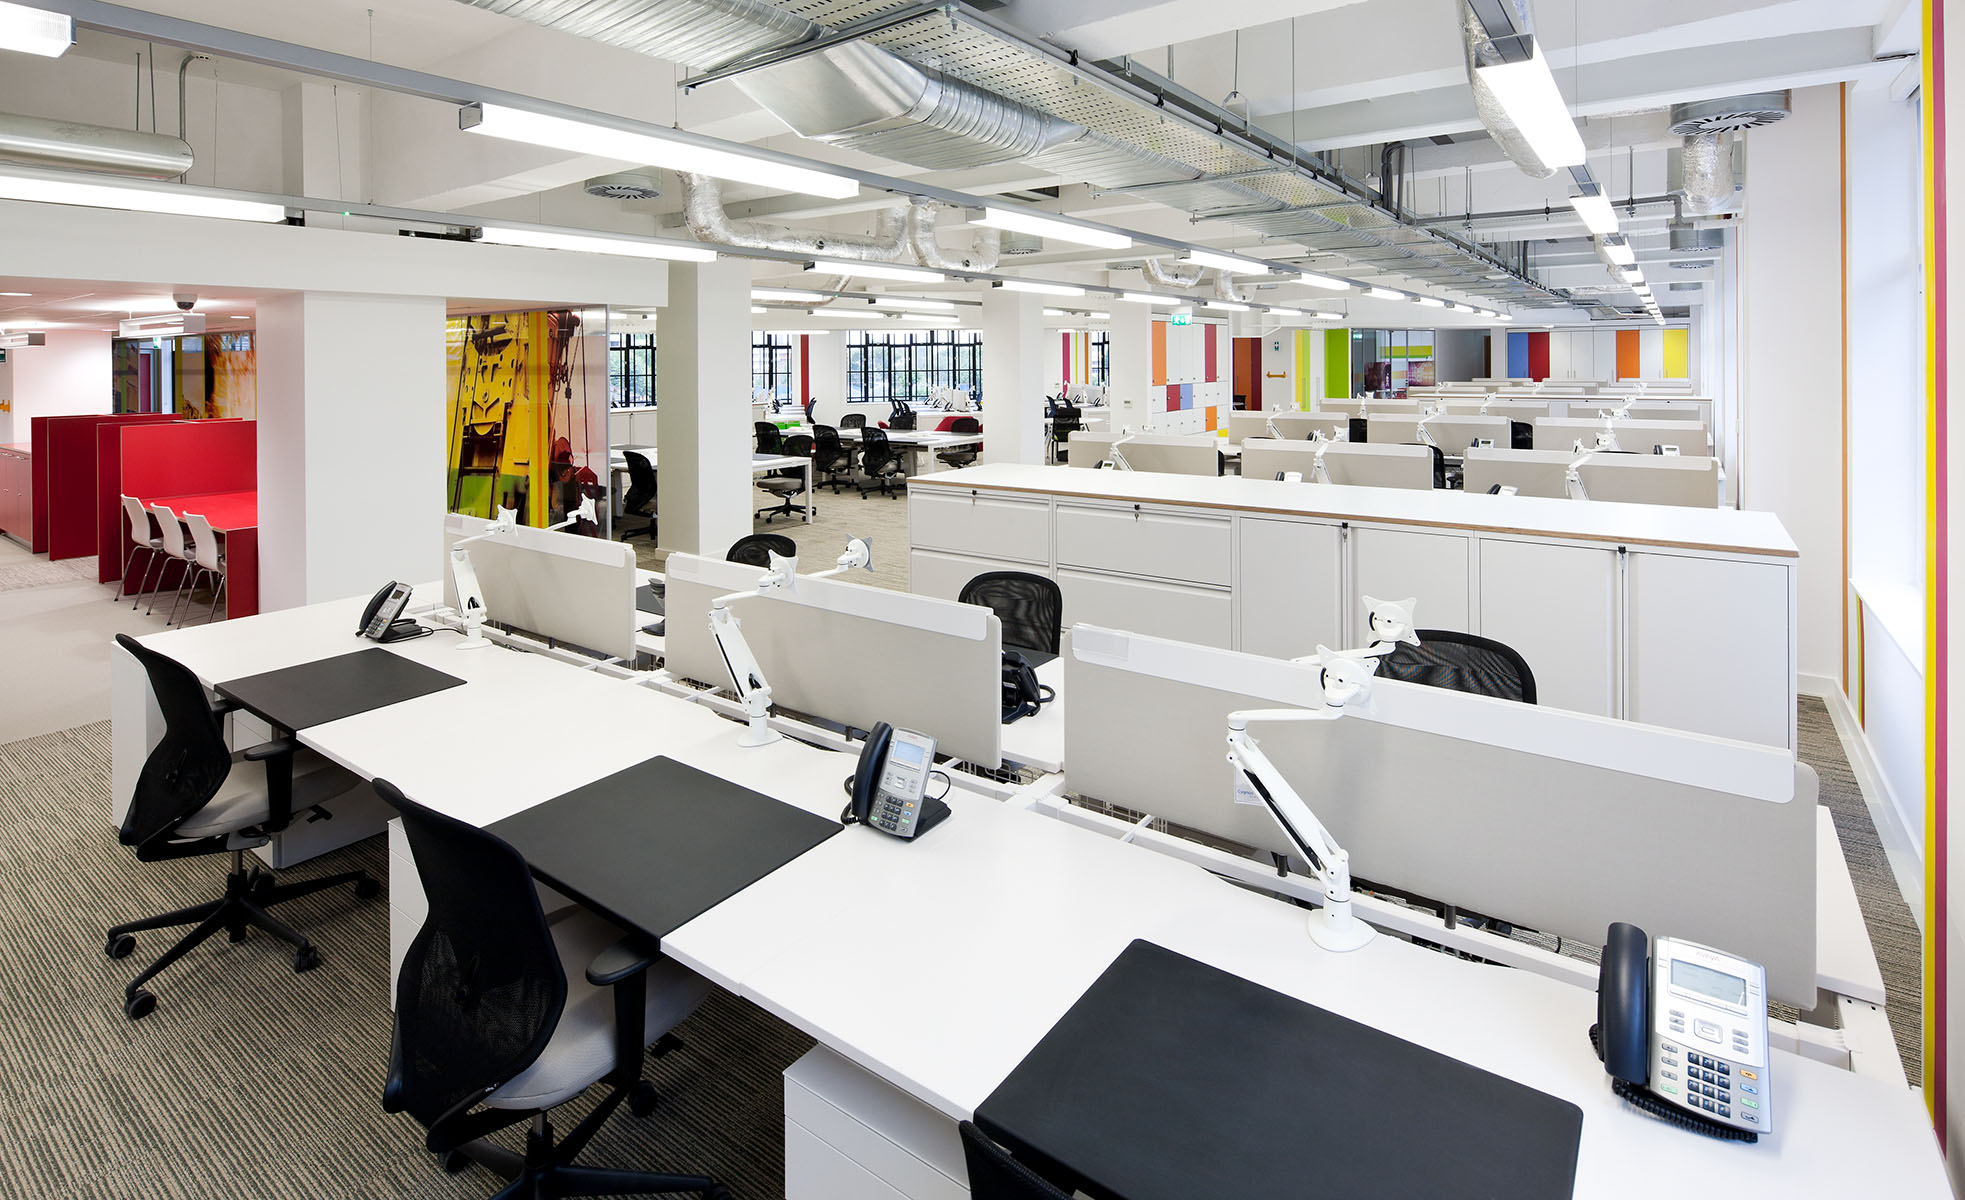 Internal refurbishment of disused building into spacious open plan offices.Client: Network Rail